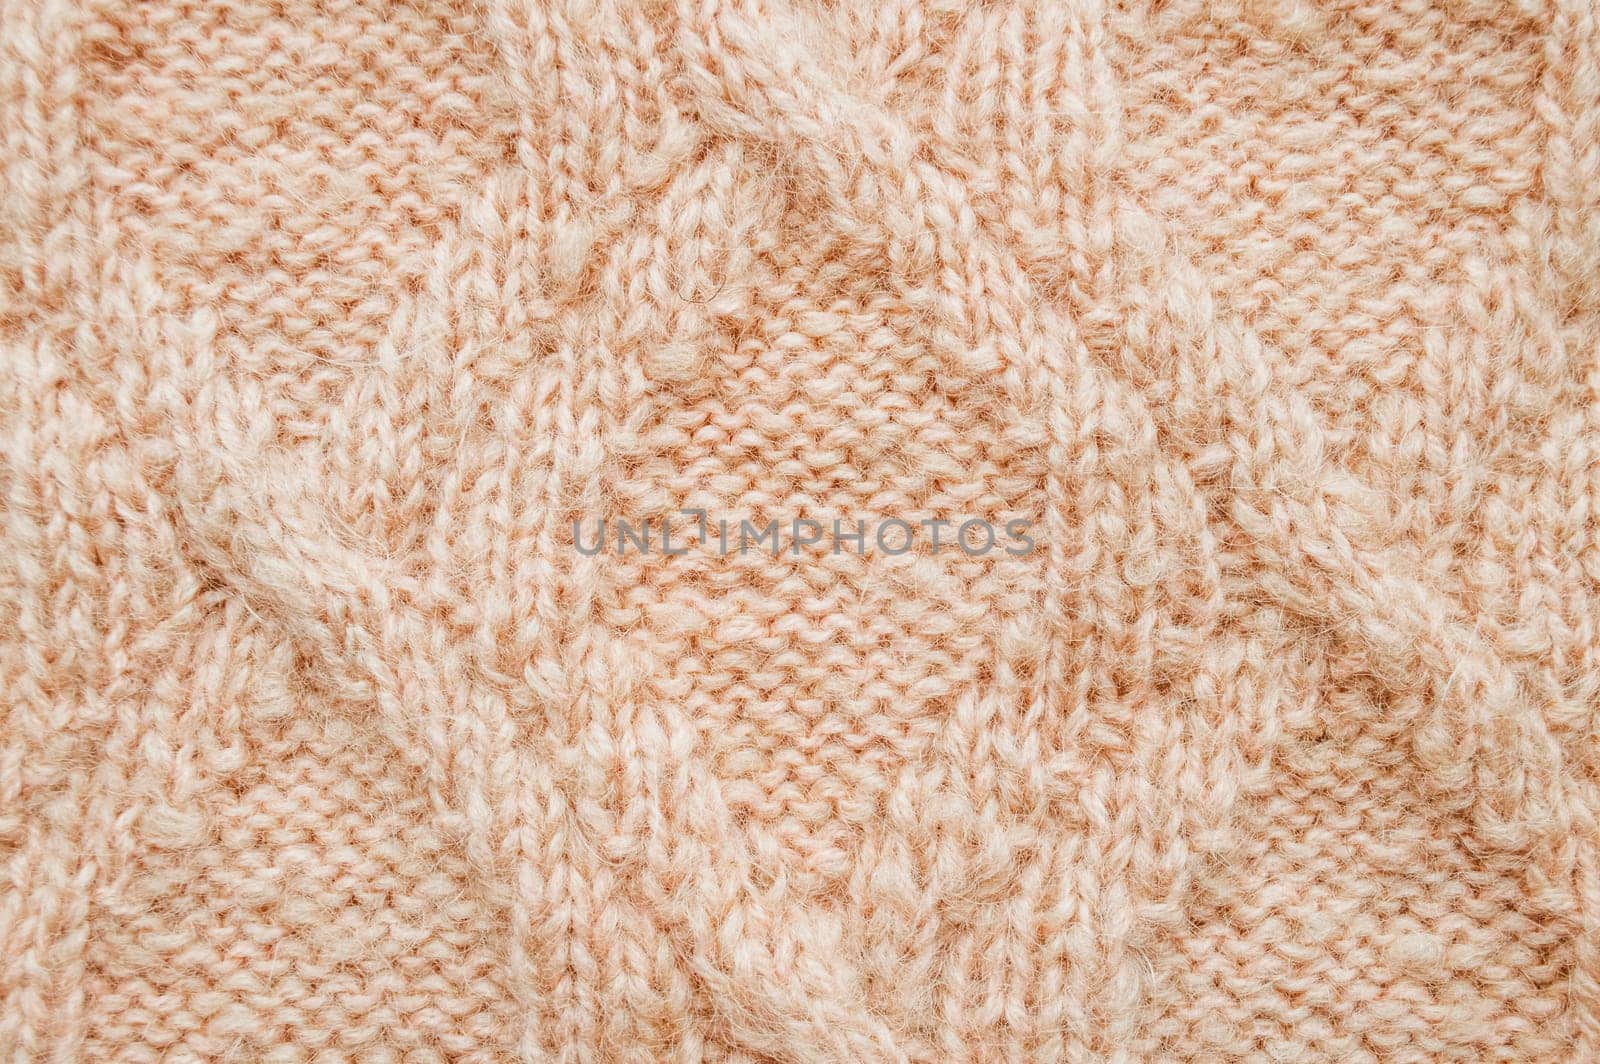 Knitting Texture. Vintage Wool Design. Knitwear Xmas Background. Detail Knitted Texture. Weave Thread. Nordic Christmas Jumper. Soft Blanket Wallpaper. Macro Knitted Texture.